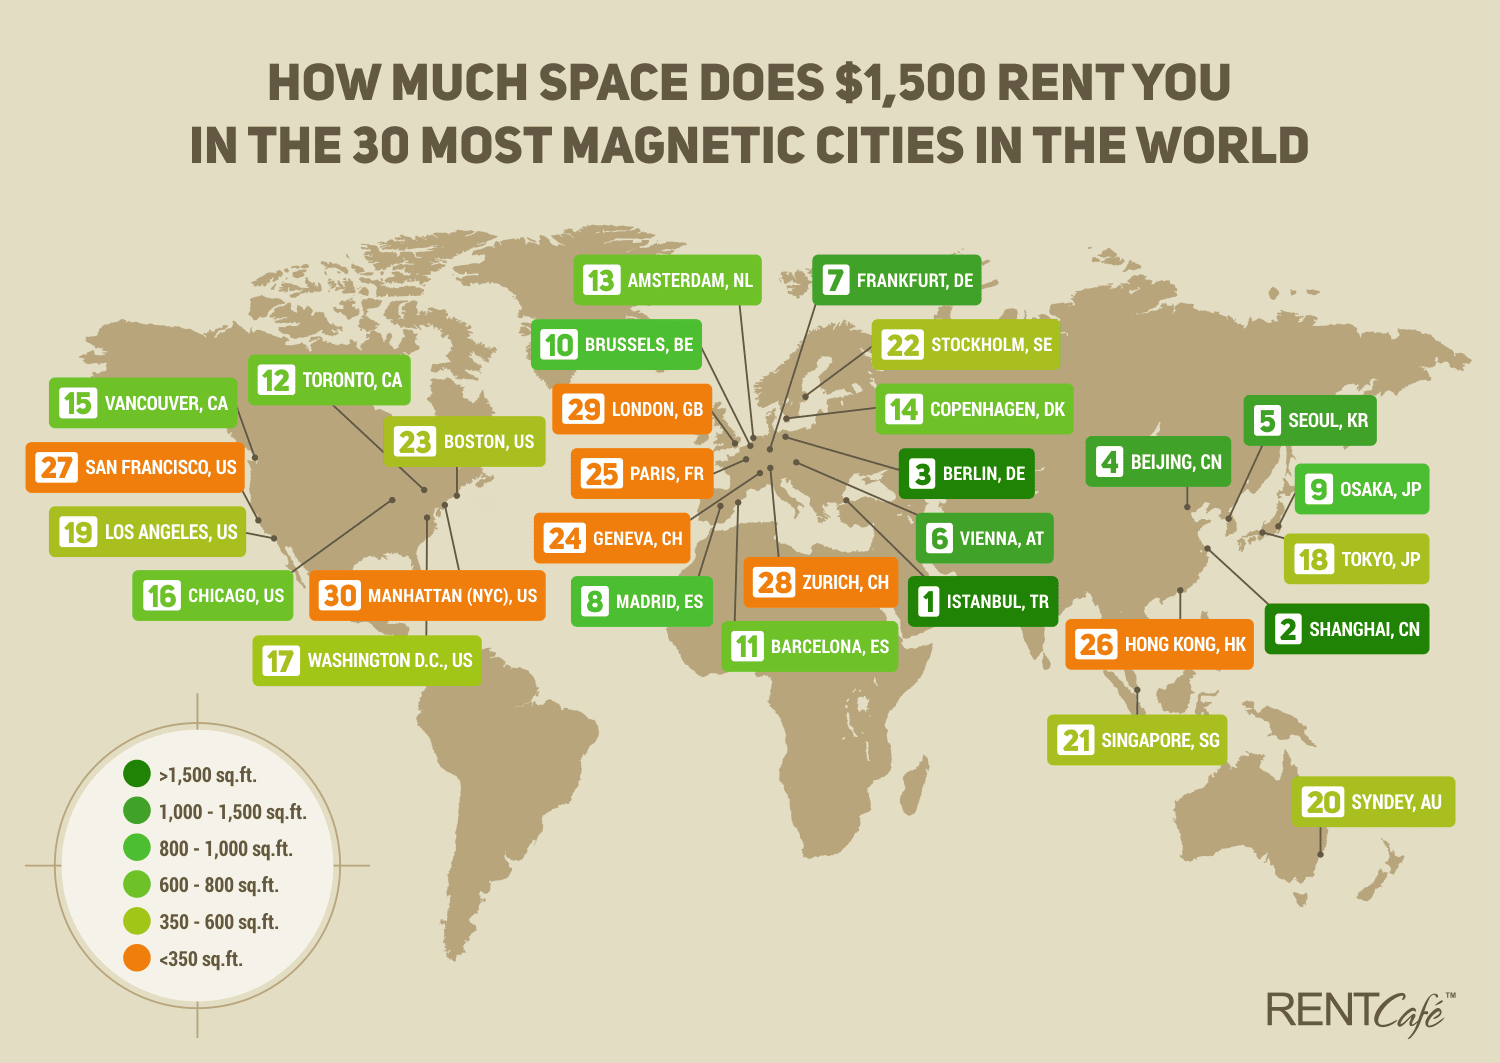 Millennial Magazine - how-much-space-1500-rent-you-worldwide_map